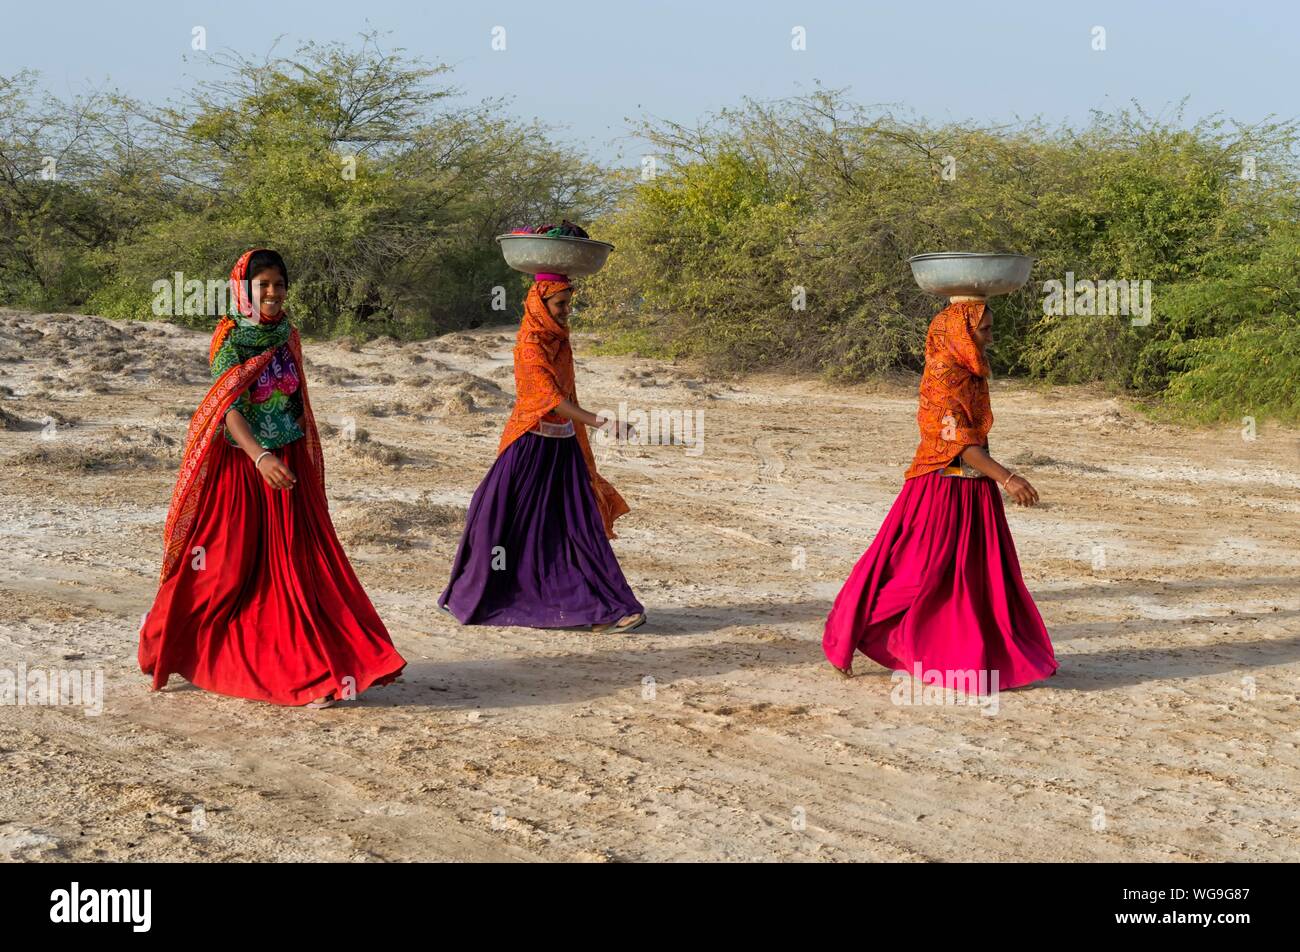 https://c8.alamy.com/comp/WG9G87/fakirani-women-in-traditional-colorful-clothes-walking-in-the-desert-with-a-basin-on-their-head-great-rann-of-kutch-gujarat-india-WG9G87.jpg